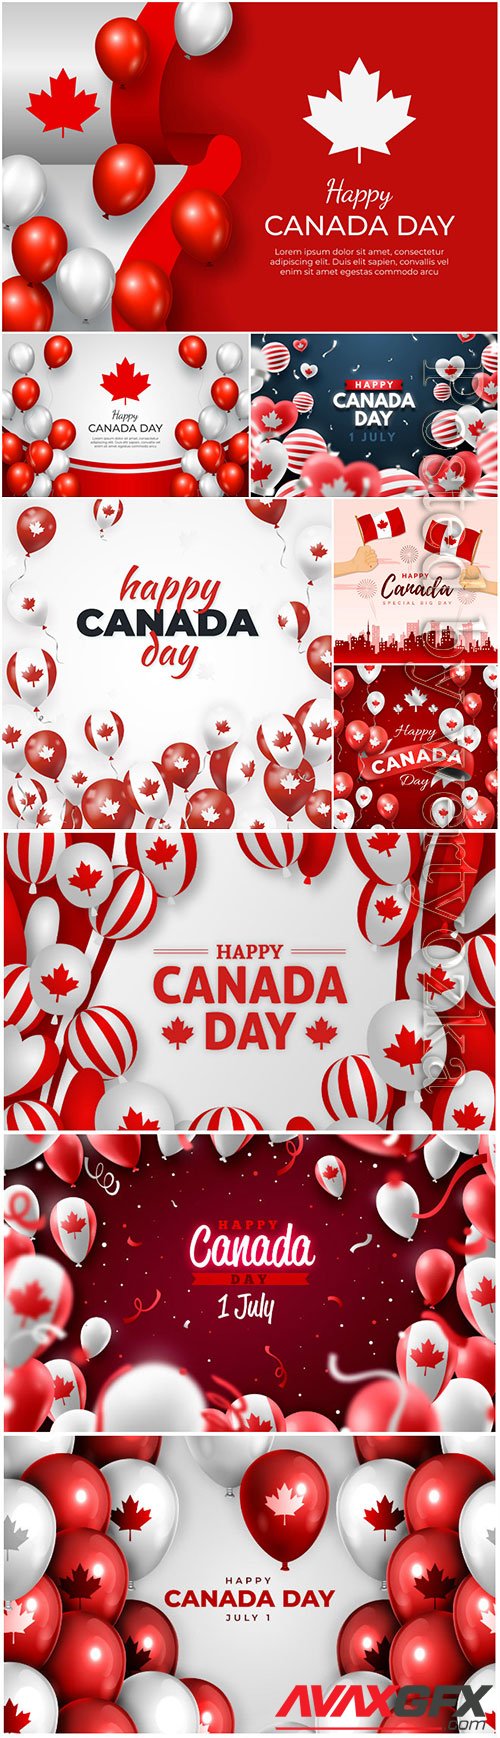 Realistic canada day balloons background vector set